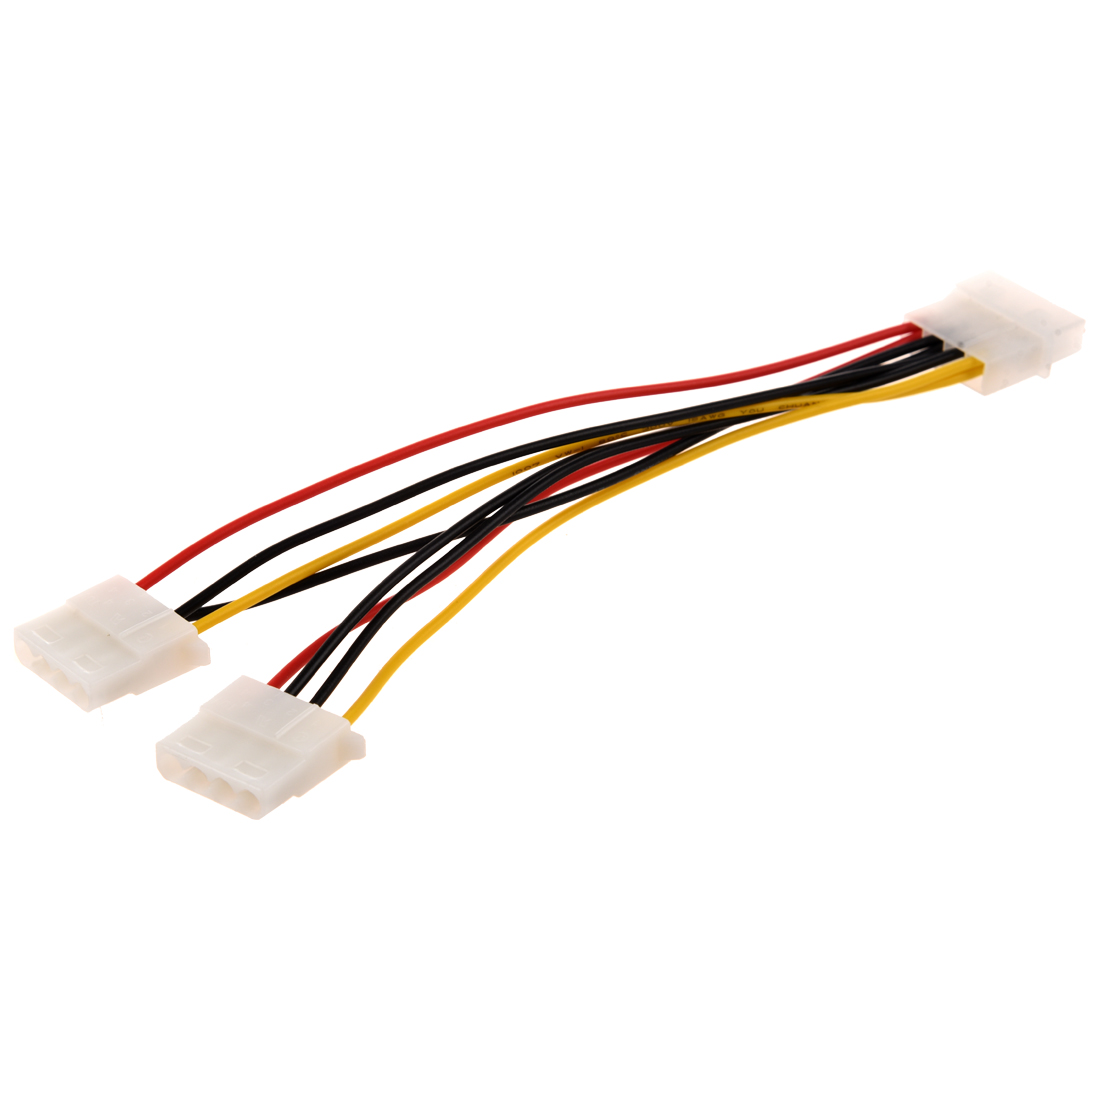 New 8 inch Computer Molex 4 Pin Power Supply Y Splitter Cable
